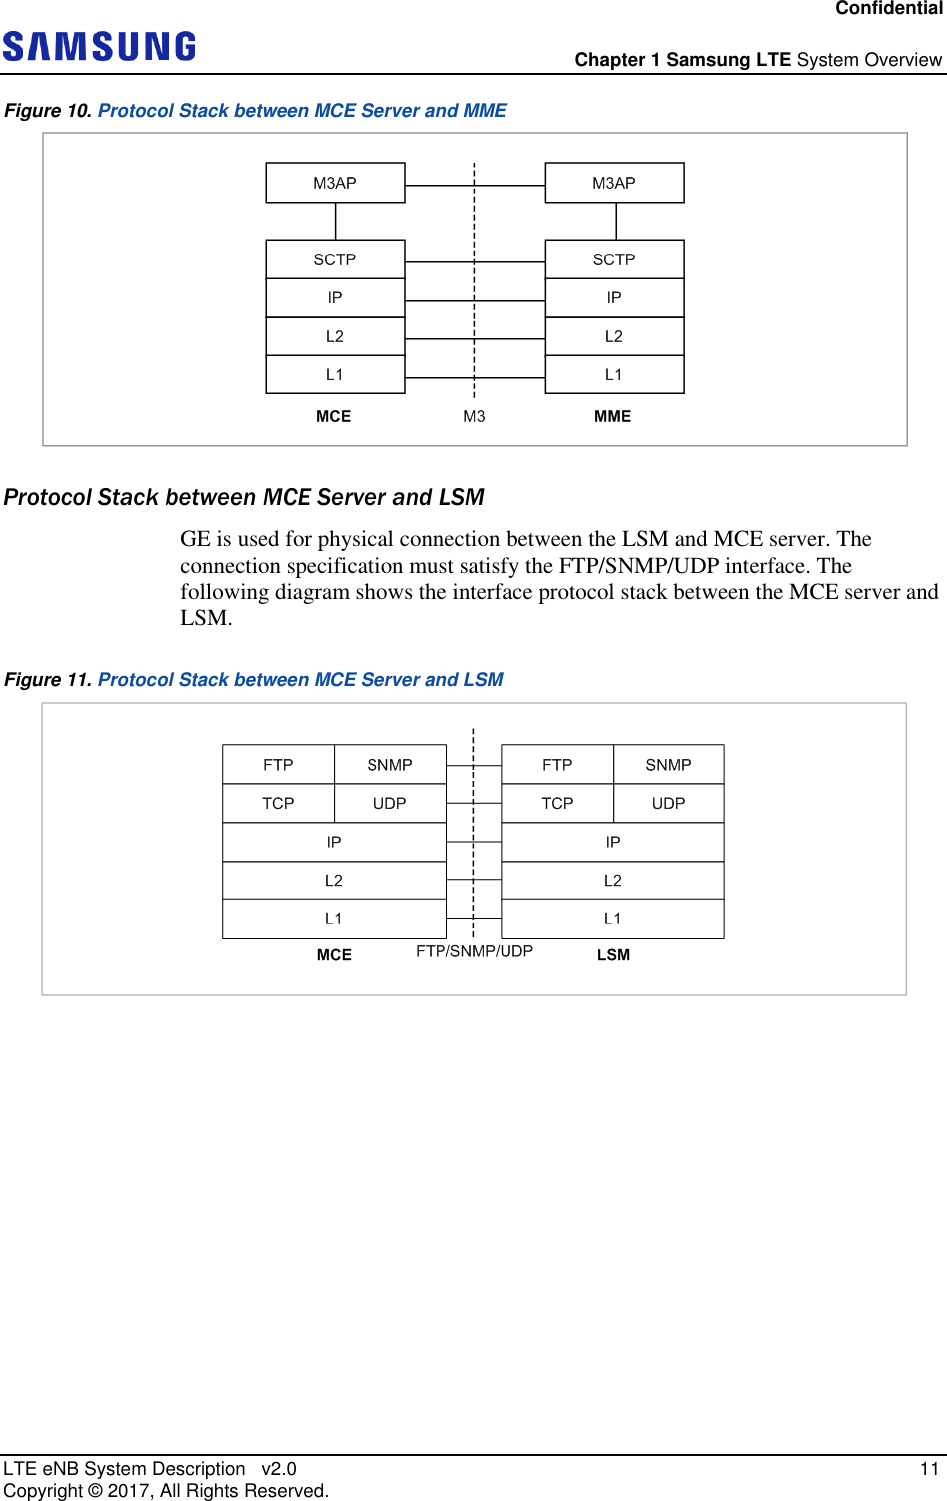 Confidential  Chapter 1 Samsung LTE System Overview LTE eNB System Description   v2.0   11 Copyright ©  2017, All Rights Reserved. Figure 10. Protocol Stack between MCE Server and MME  Protocol Stack between MCE Server and LSM GE is used for physical connection between the LSM and MCE server. The connection specification must satisfy the FTP/SNMP/UDP interface. The following diagram shows the interface protocol stack between the MCE server and LSM. Figure 11. Protocol Stack between MCE Server and LSM    